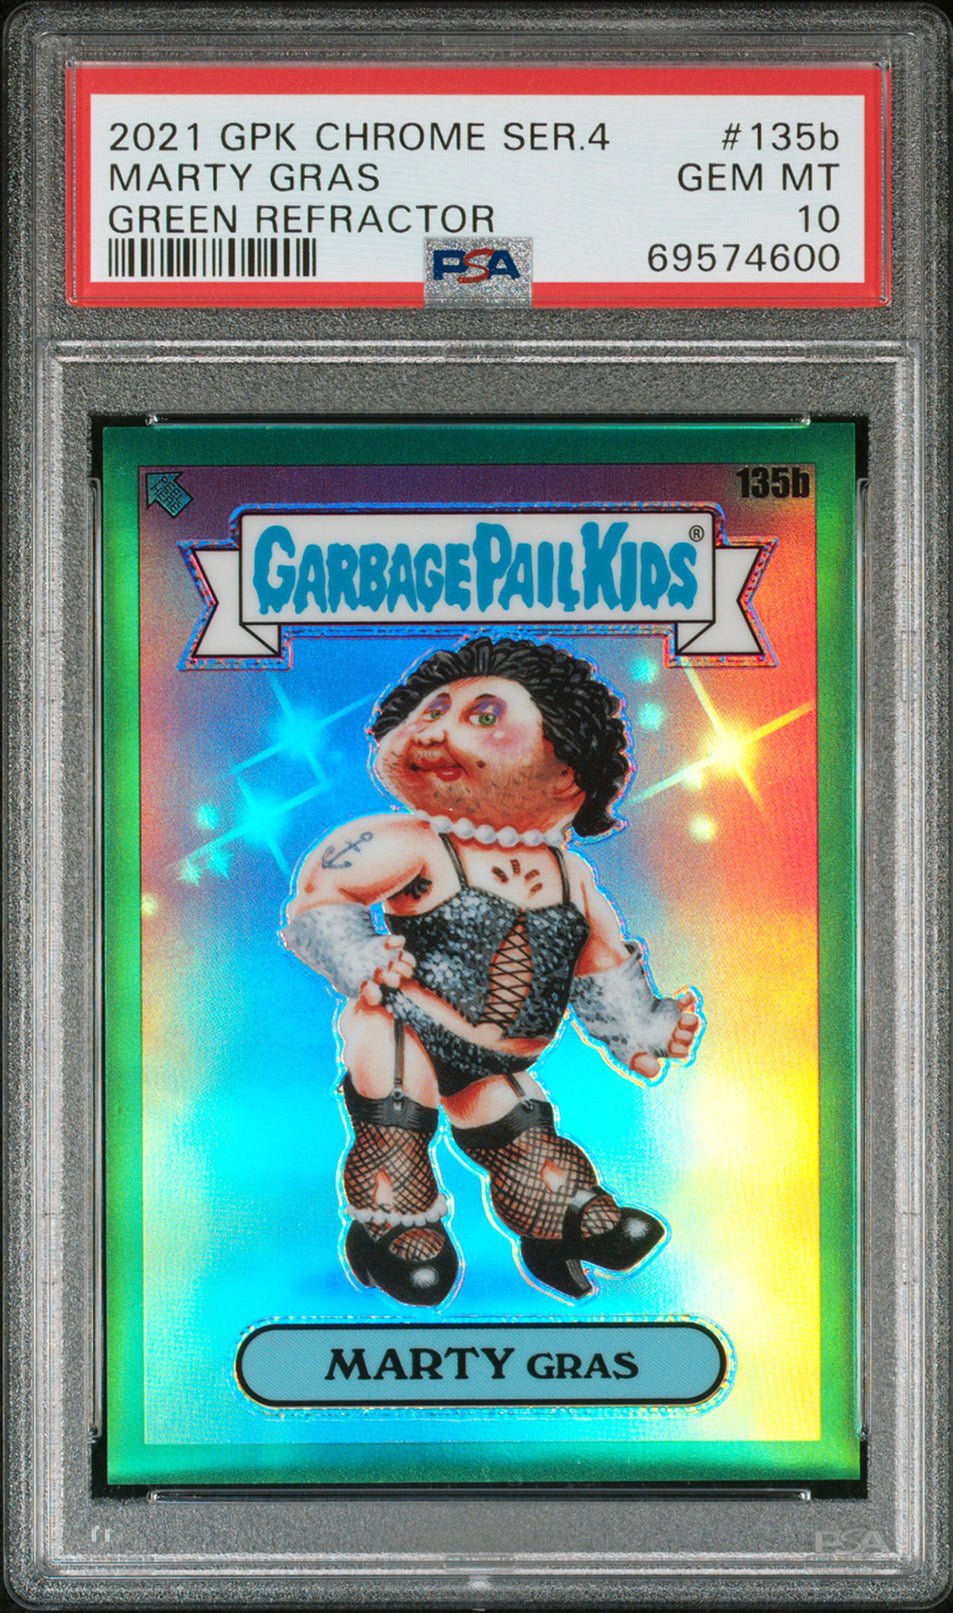 MARTY GRAS PSA 10 2021 Topps Chrome Green Refractor 135b 93/299 Garbage Pail Kids Graded Cards Parallel Serial Numbered - Hobby Gems